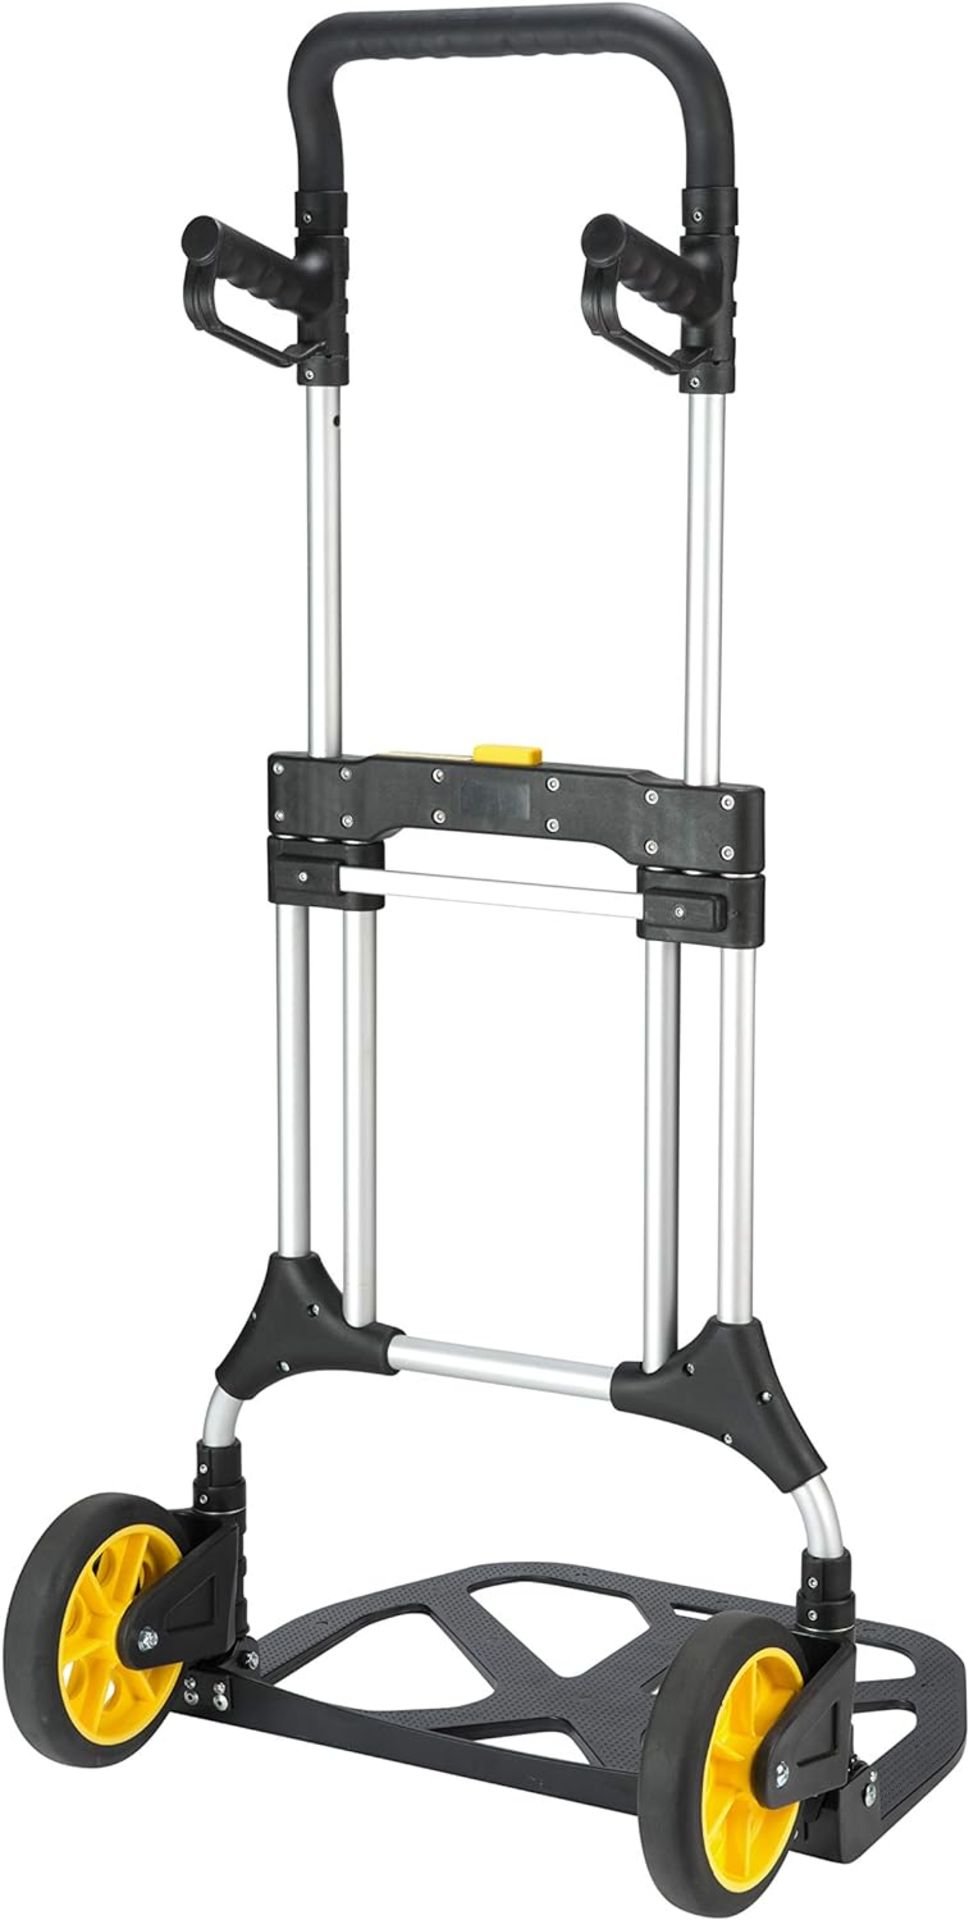 2 x Brand New STANLEY Aluminium Sack Truck, Black, Silver, FXWT-705, Multifunctional: ideal for - Image 3 of 4